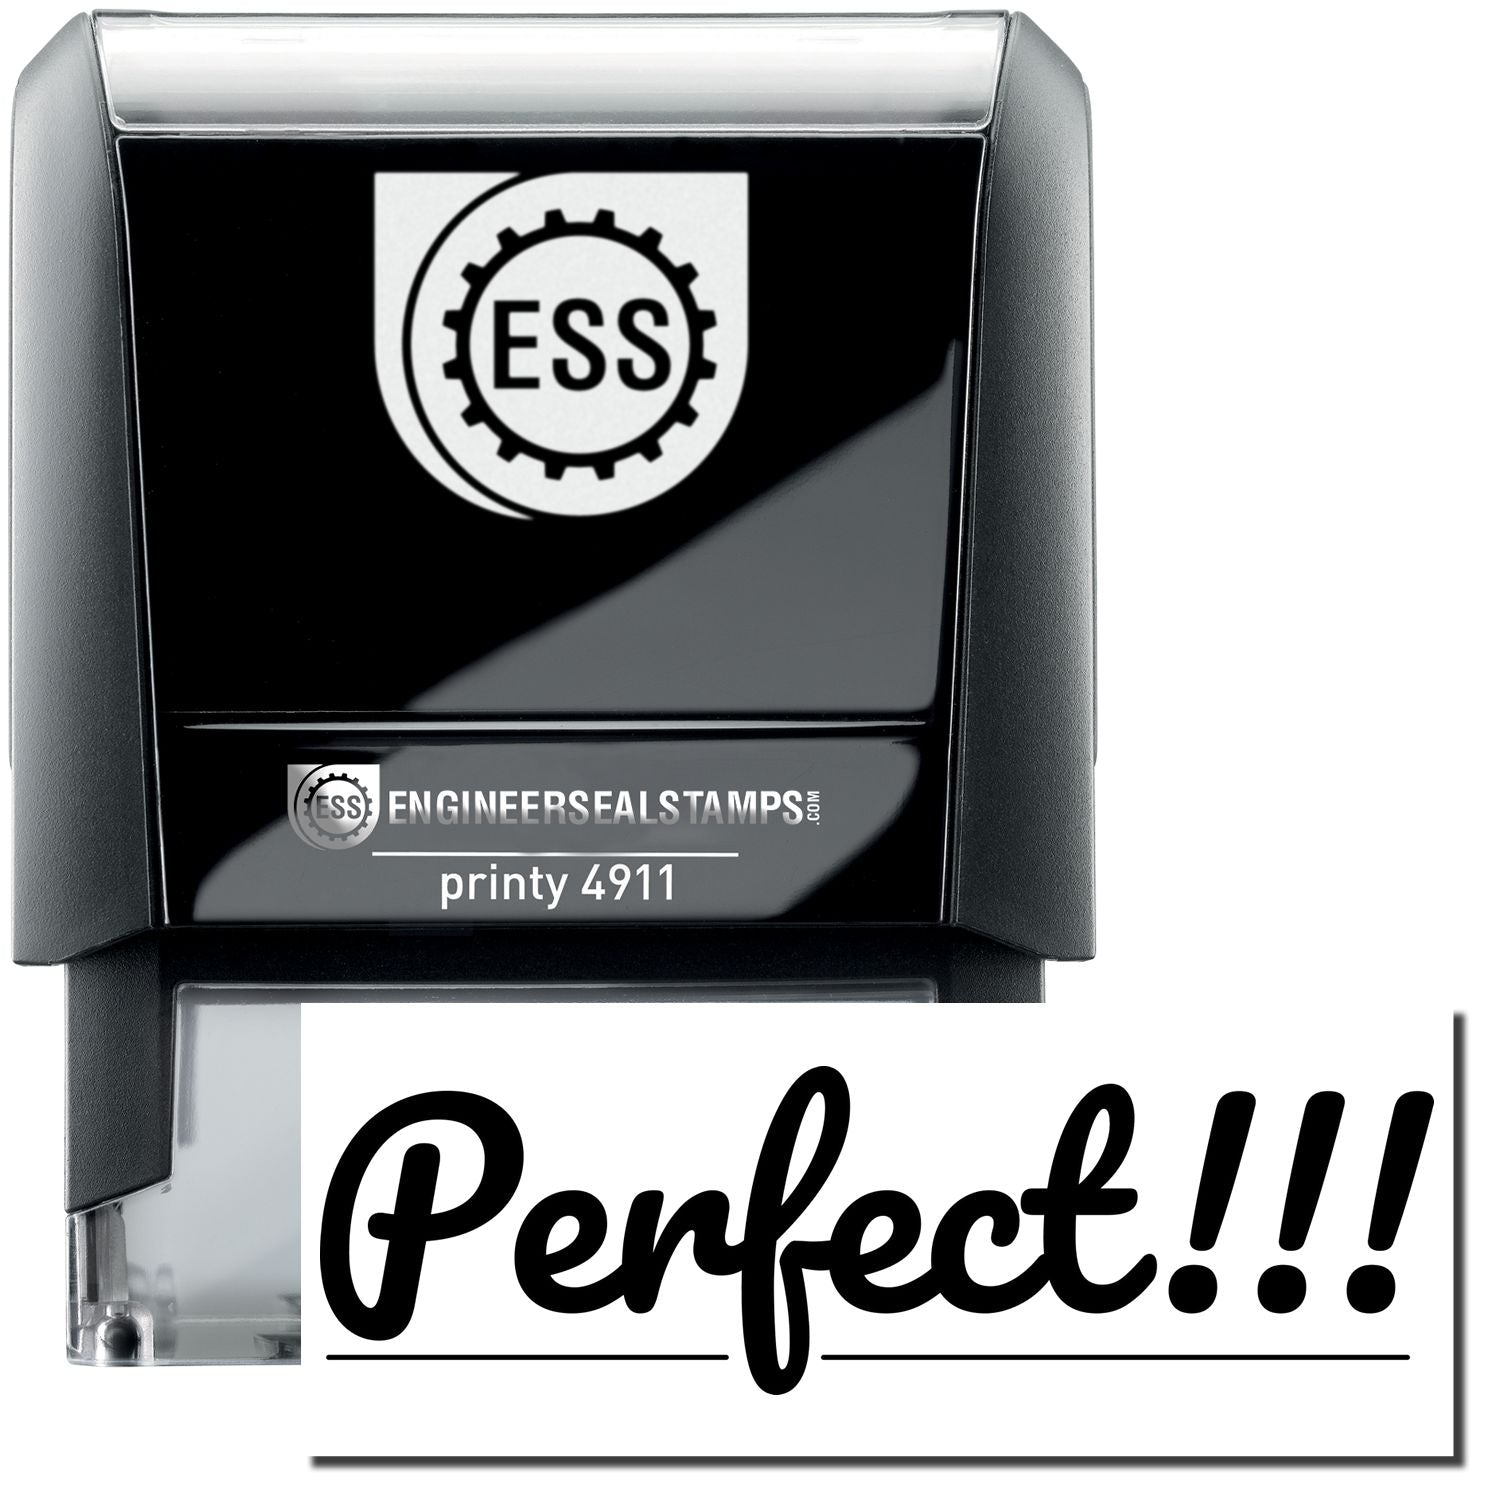 A self-inking stamp with a stamped image showing how the word "Perfect!!!" (in a bold font with a line underneath and several exclamation points at the end) is displayed after stamping.